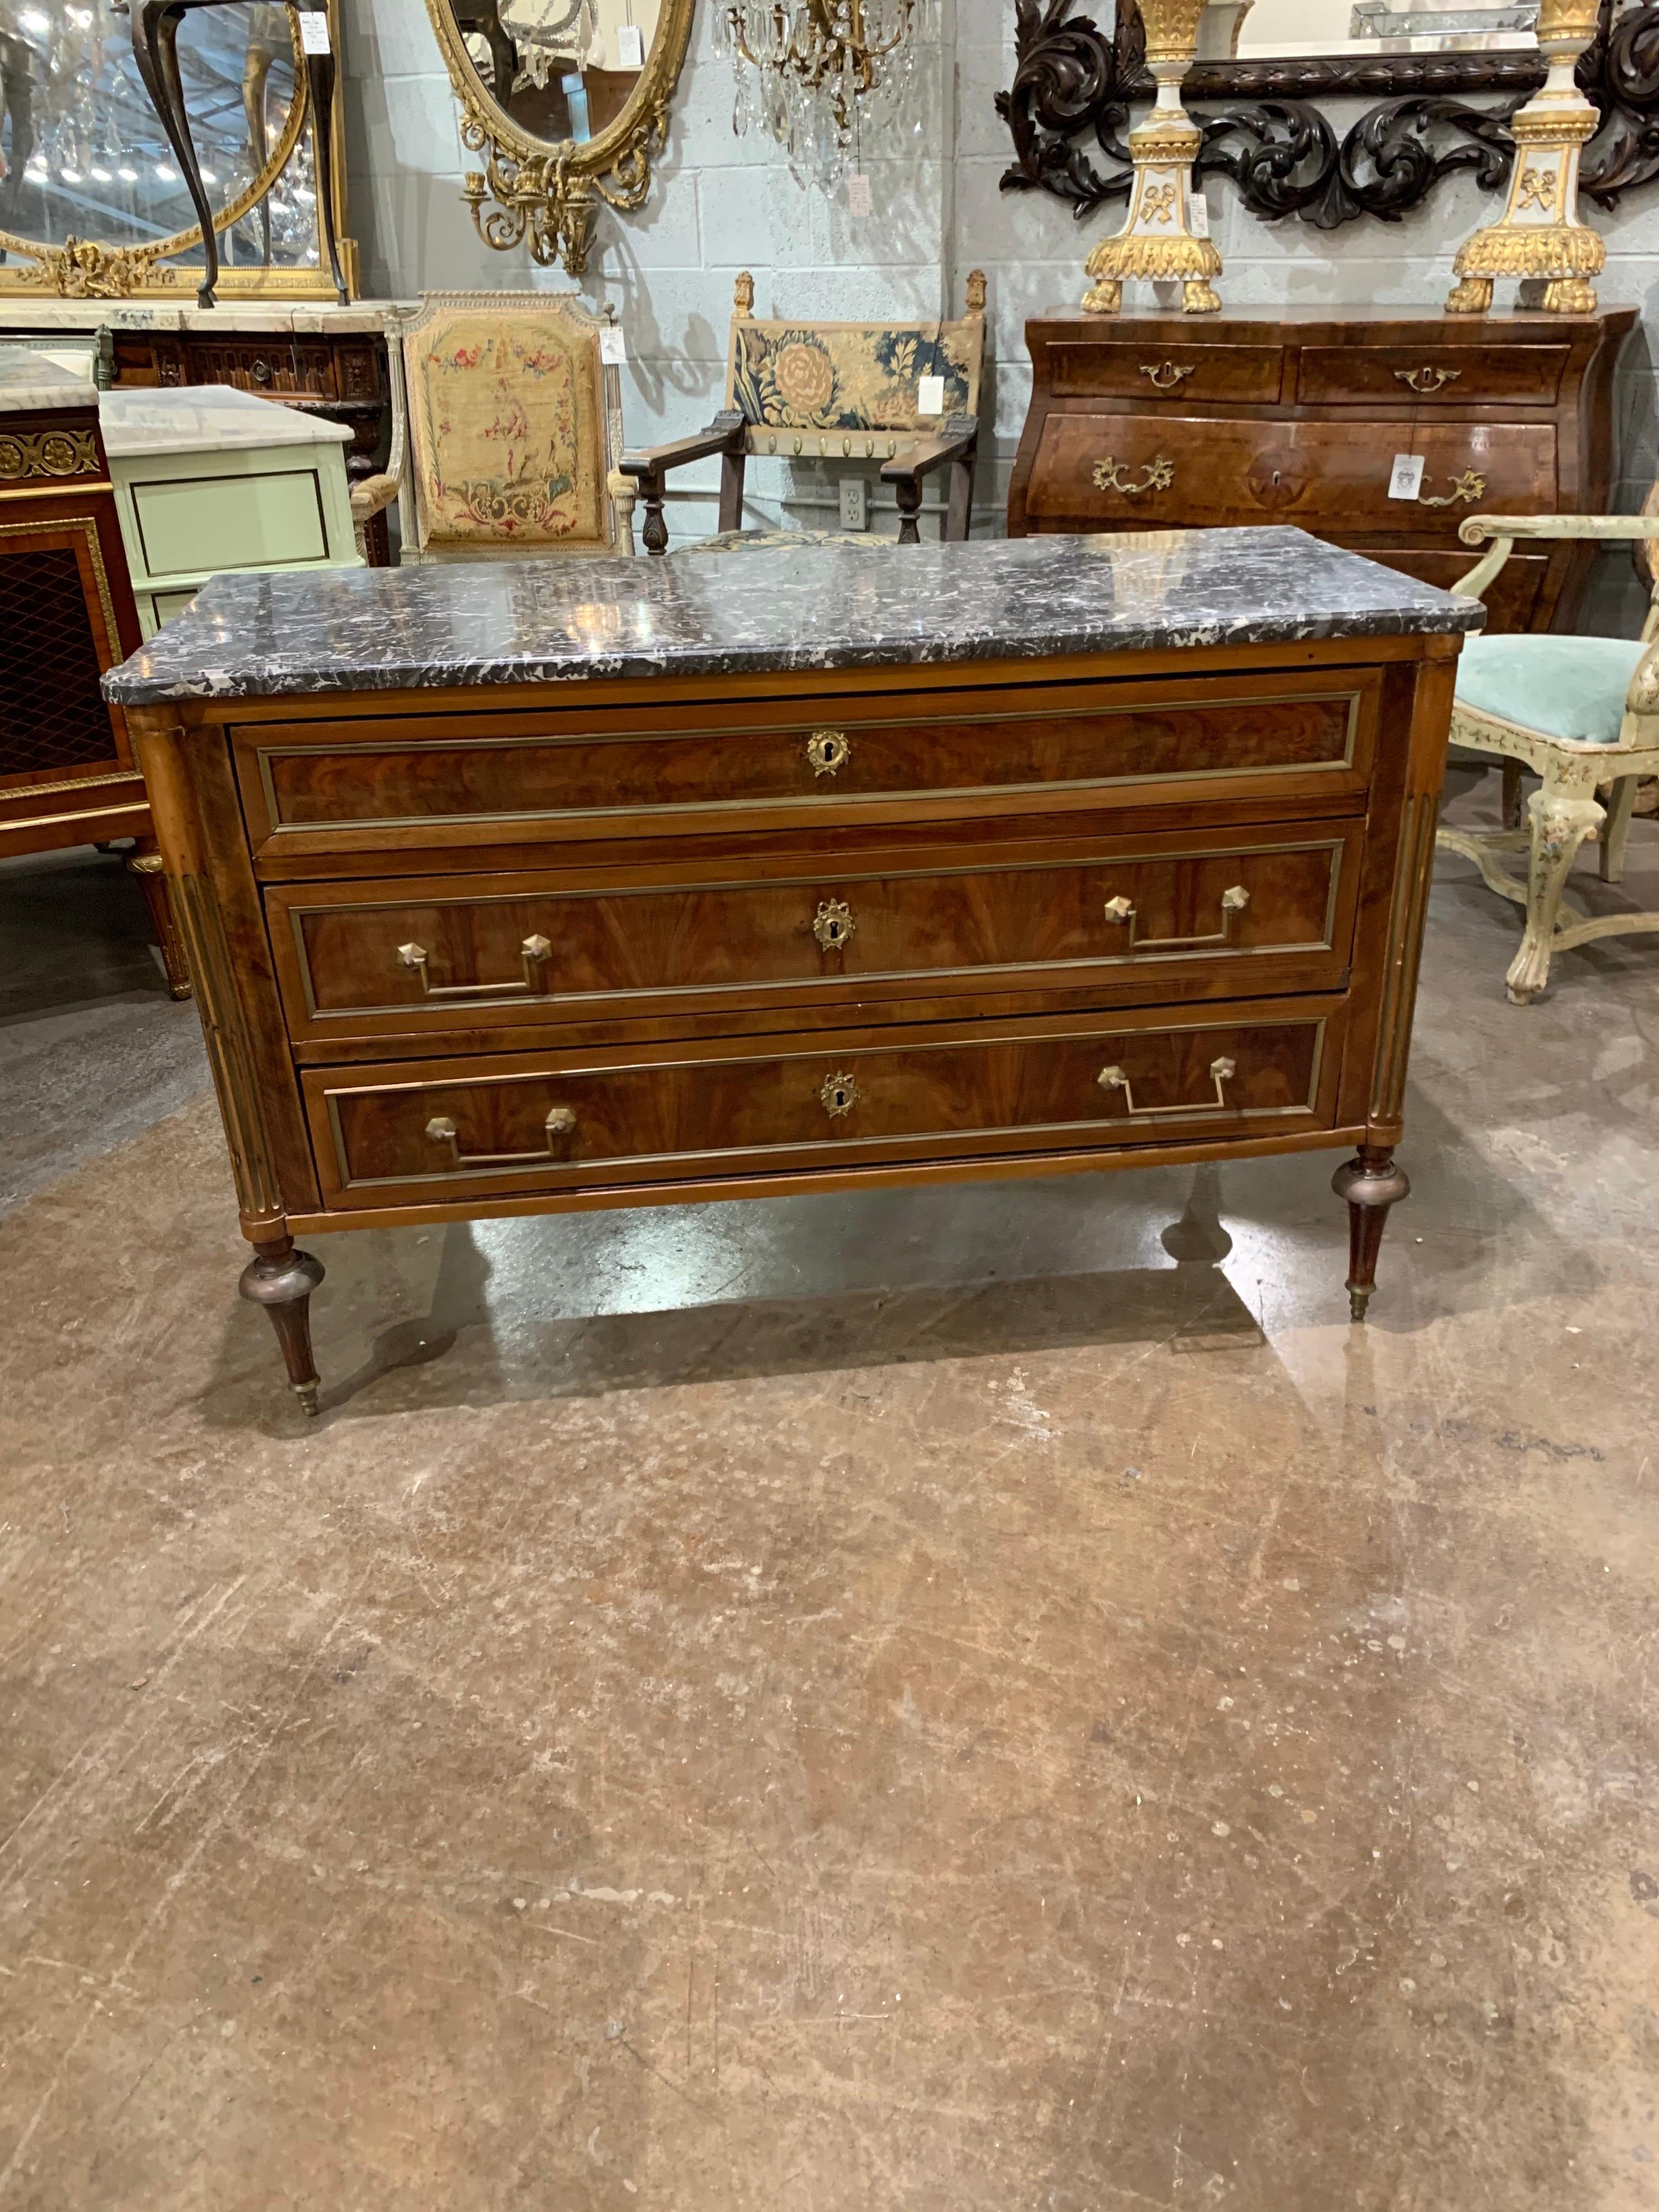 Fabulous period 18th century French Directoire mahogany commode with brass trim. This piece also has a gorgeous original grey marble top. True elegance!